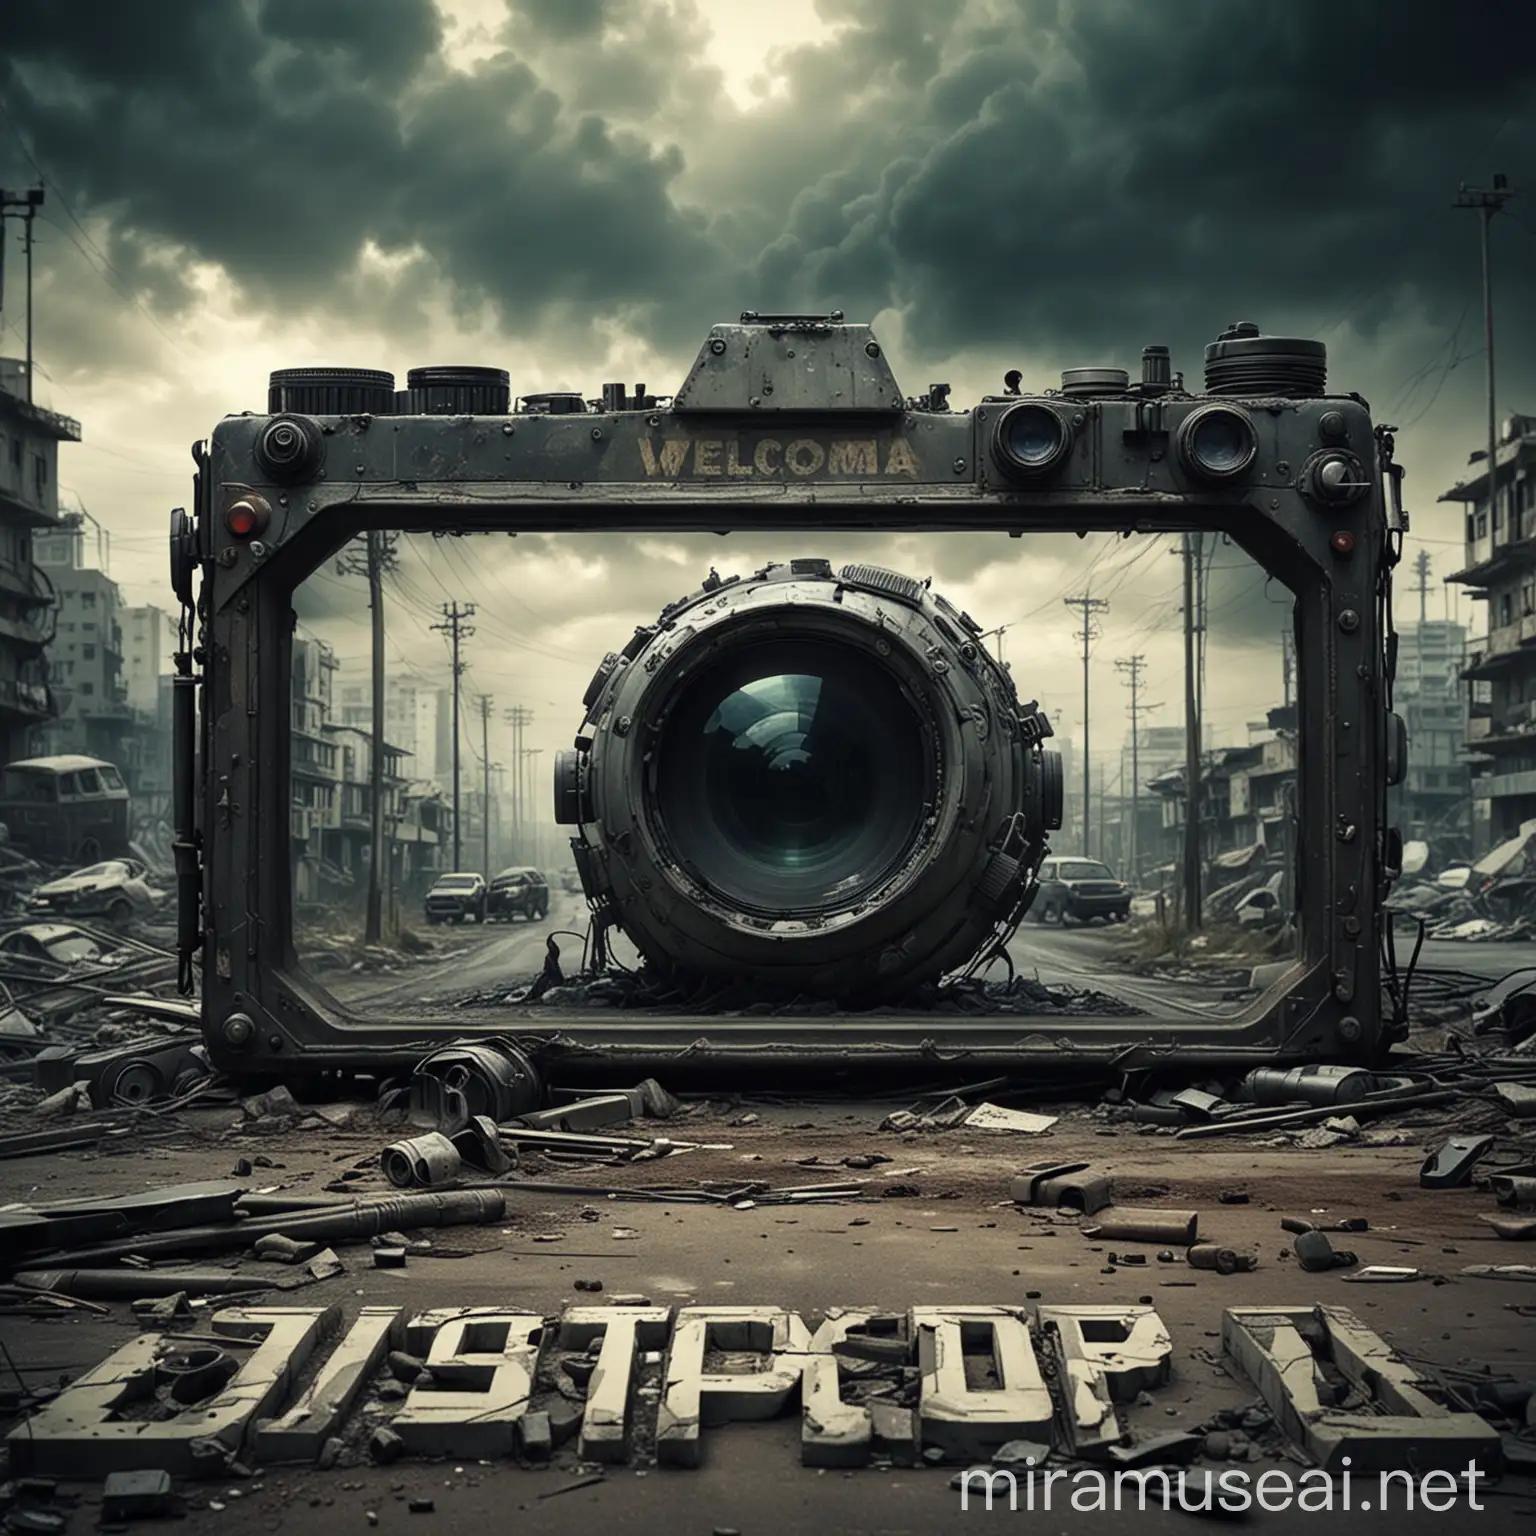 A Dystopia, writing: ''Welcome to Dystopia'', camera picture on it, setting is dystopian world.